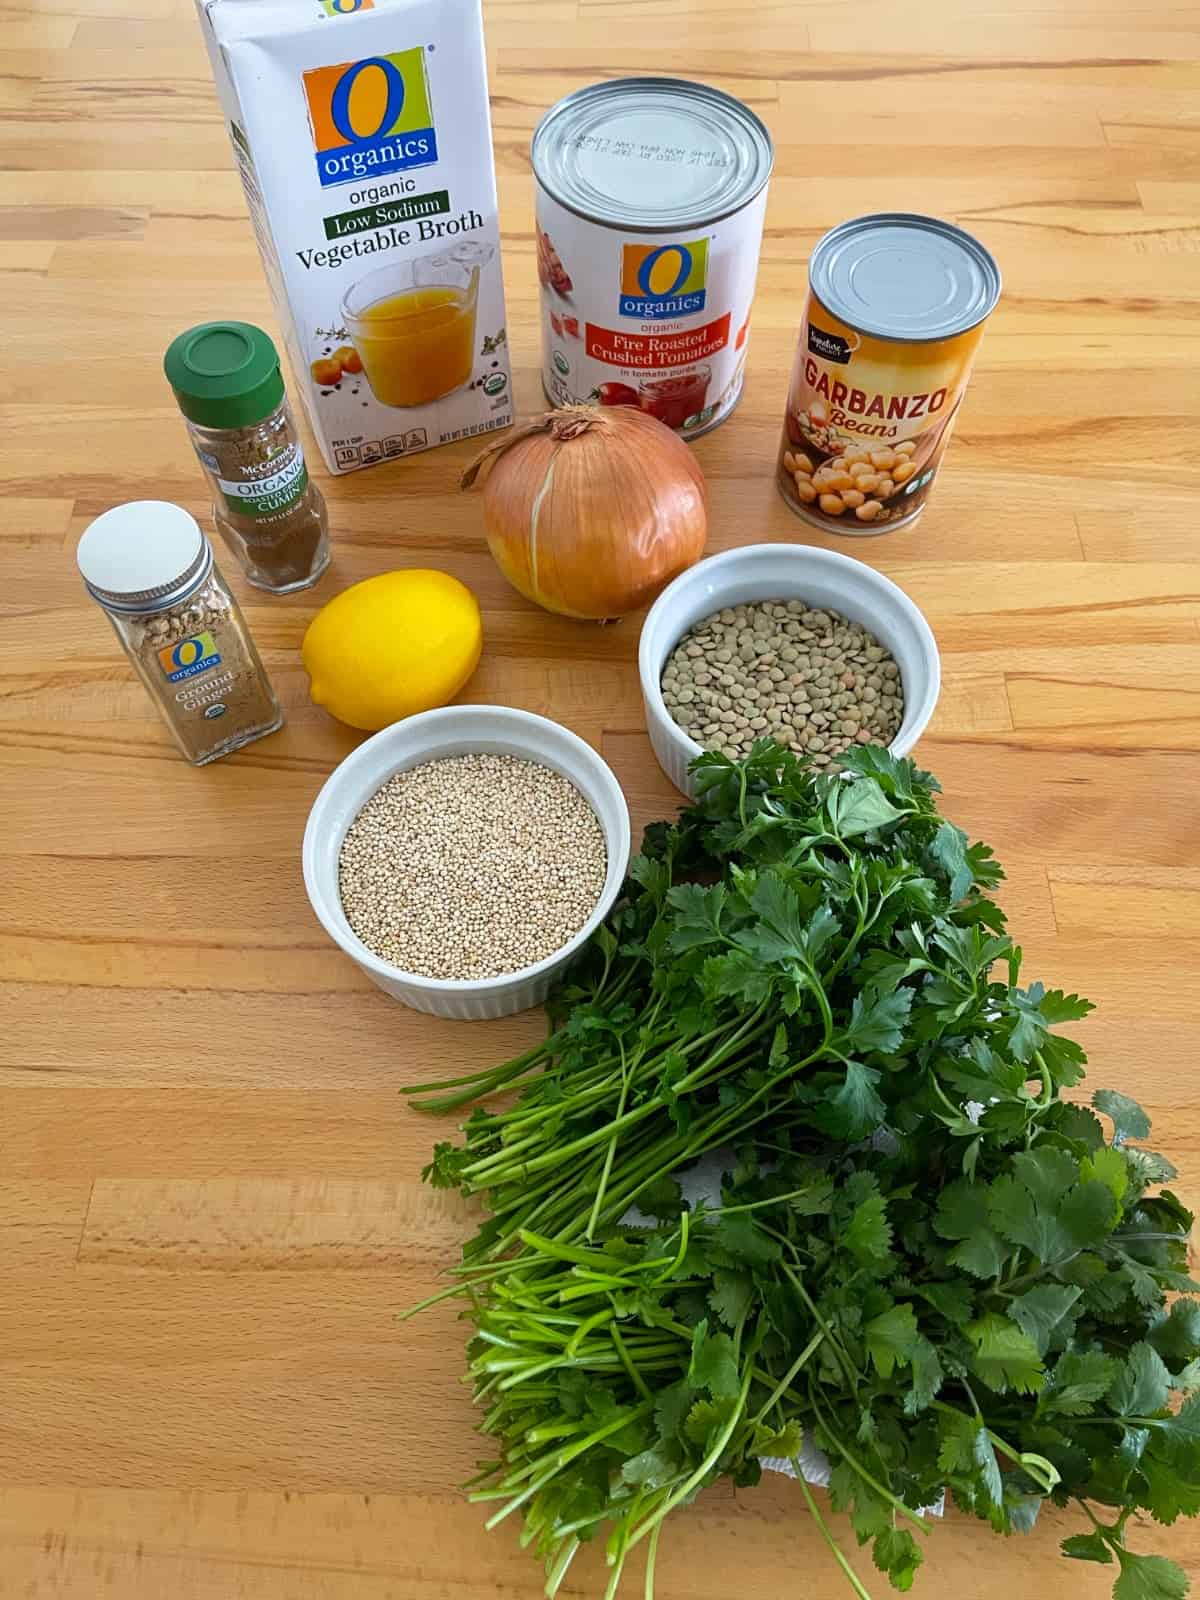 Ingredients for making soup including vegetable broth, canned tomatoes, garbanzo beans, dried lentils, quinoa, lemon, onion, cilantro and parsley.